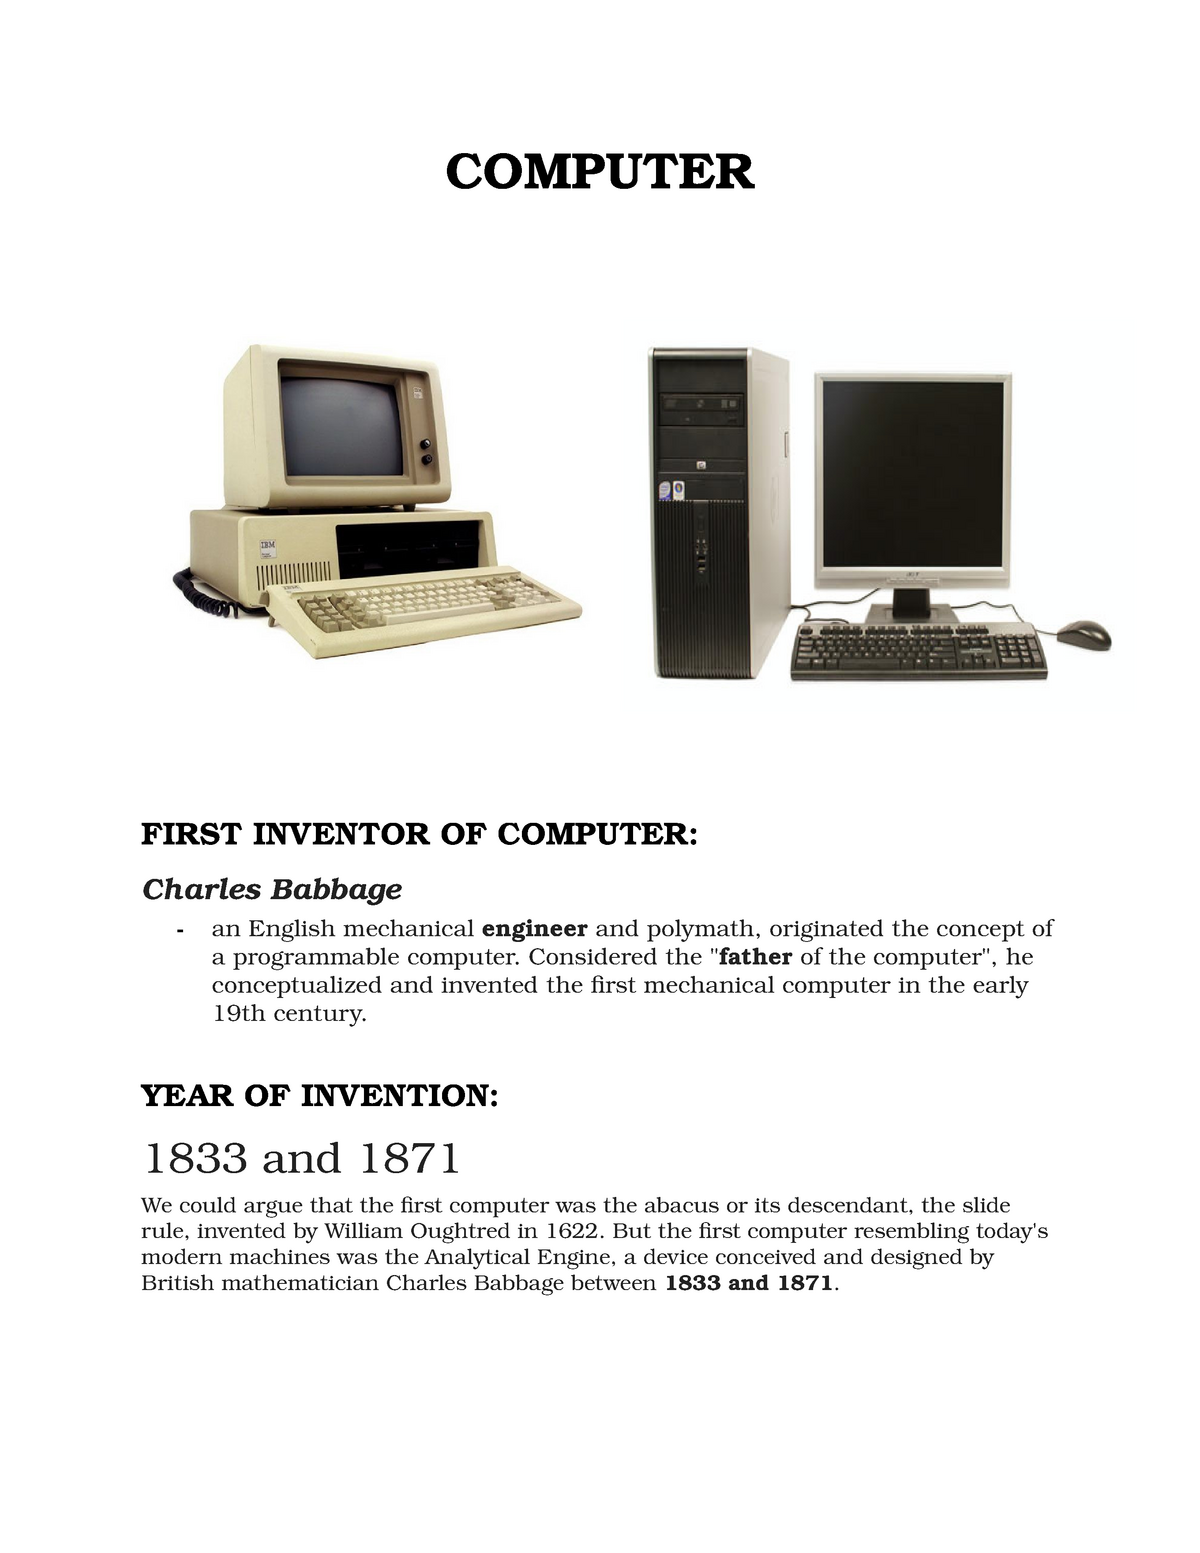 essay on invention of computer